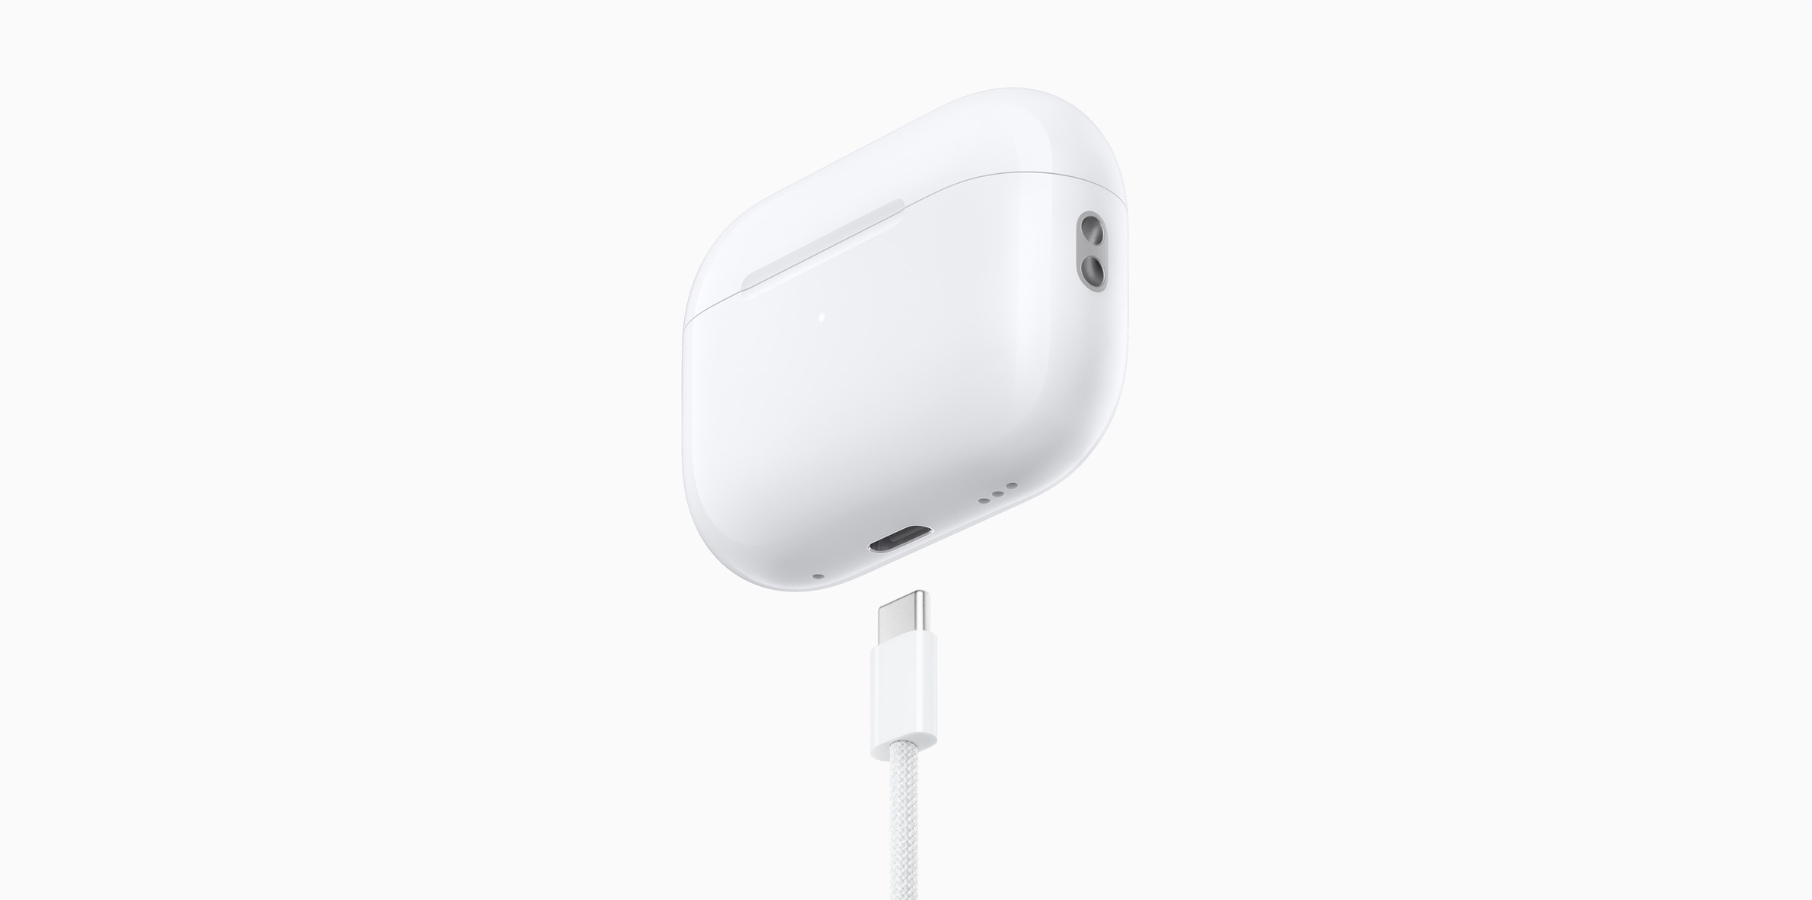 I'm upgrading to the AirPods Pro 2 with USB-C despite the small 